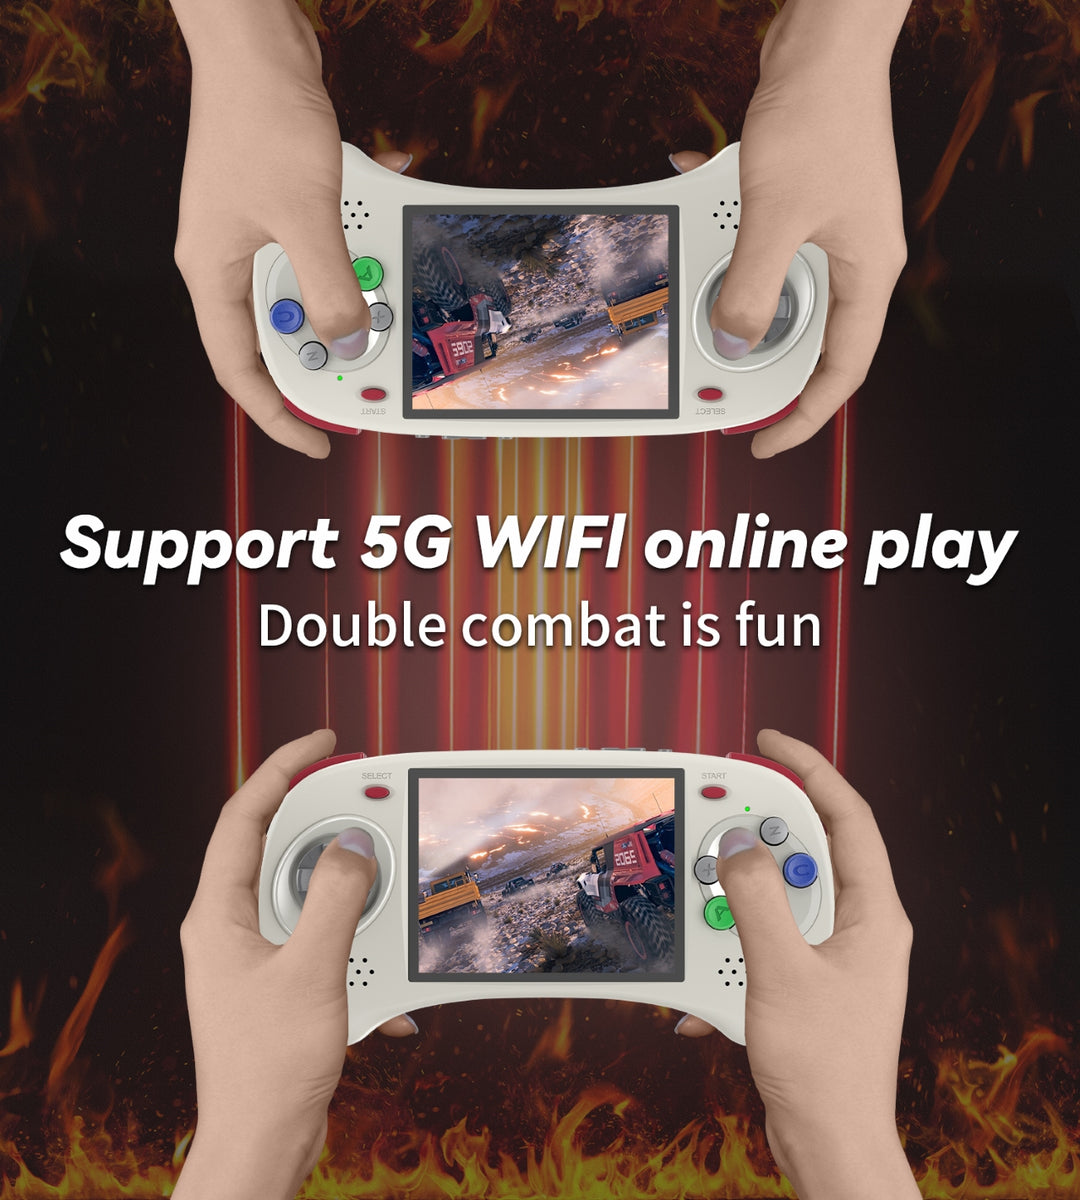 Anbernic RG ARC-D wifi 5G connectivity to connect between consoles